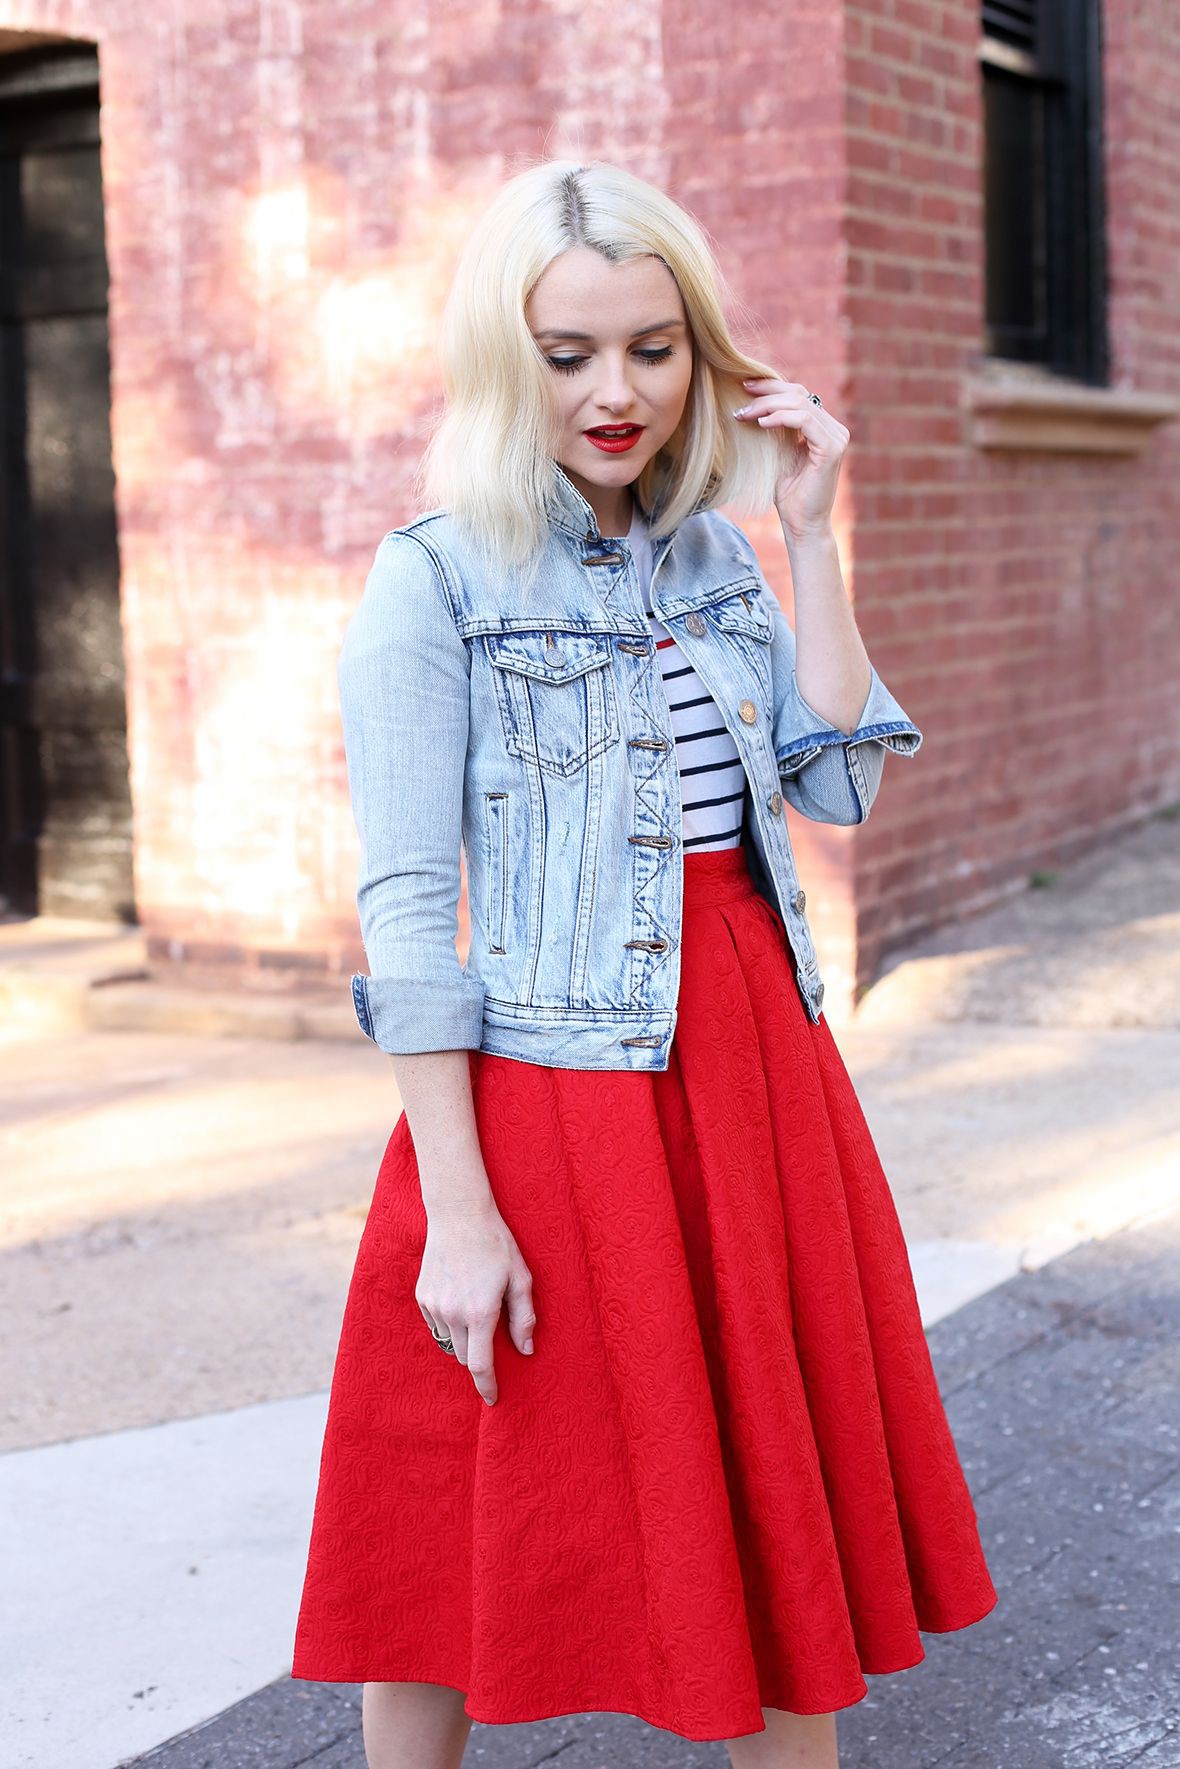 Casual red skirt outfit, Casual wear: Denim Outfits,  Jean jacket,  Pencil skirt,  Ballet flat,  Casual Outfits,  Swing skirt  